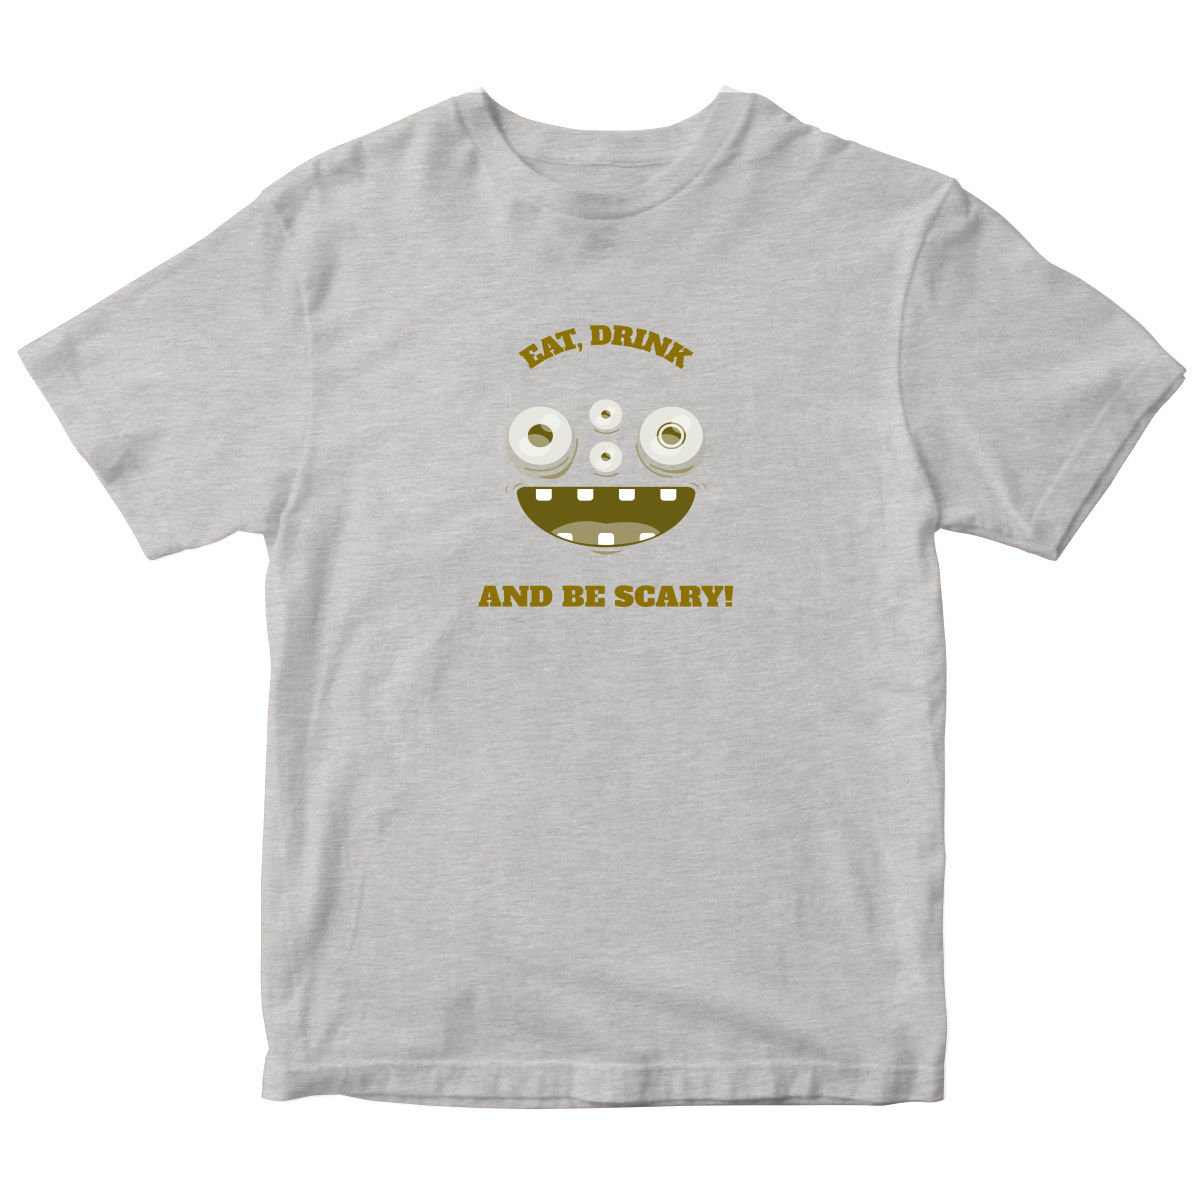 Eat, Drink and Be Scary! Kids T-shirt | Gray